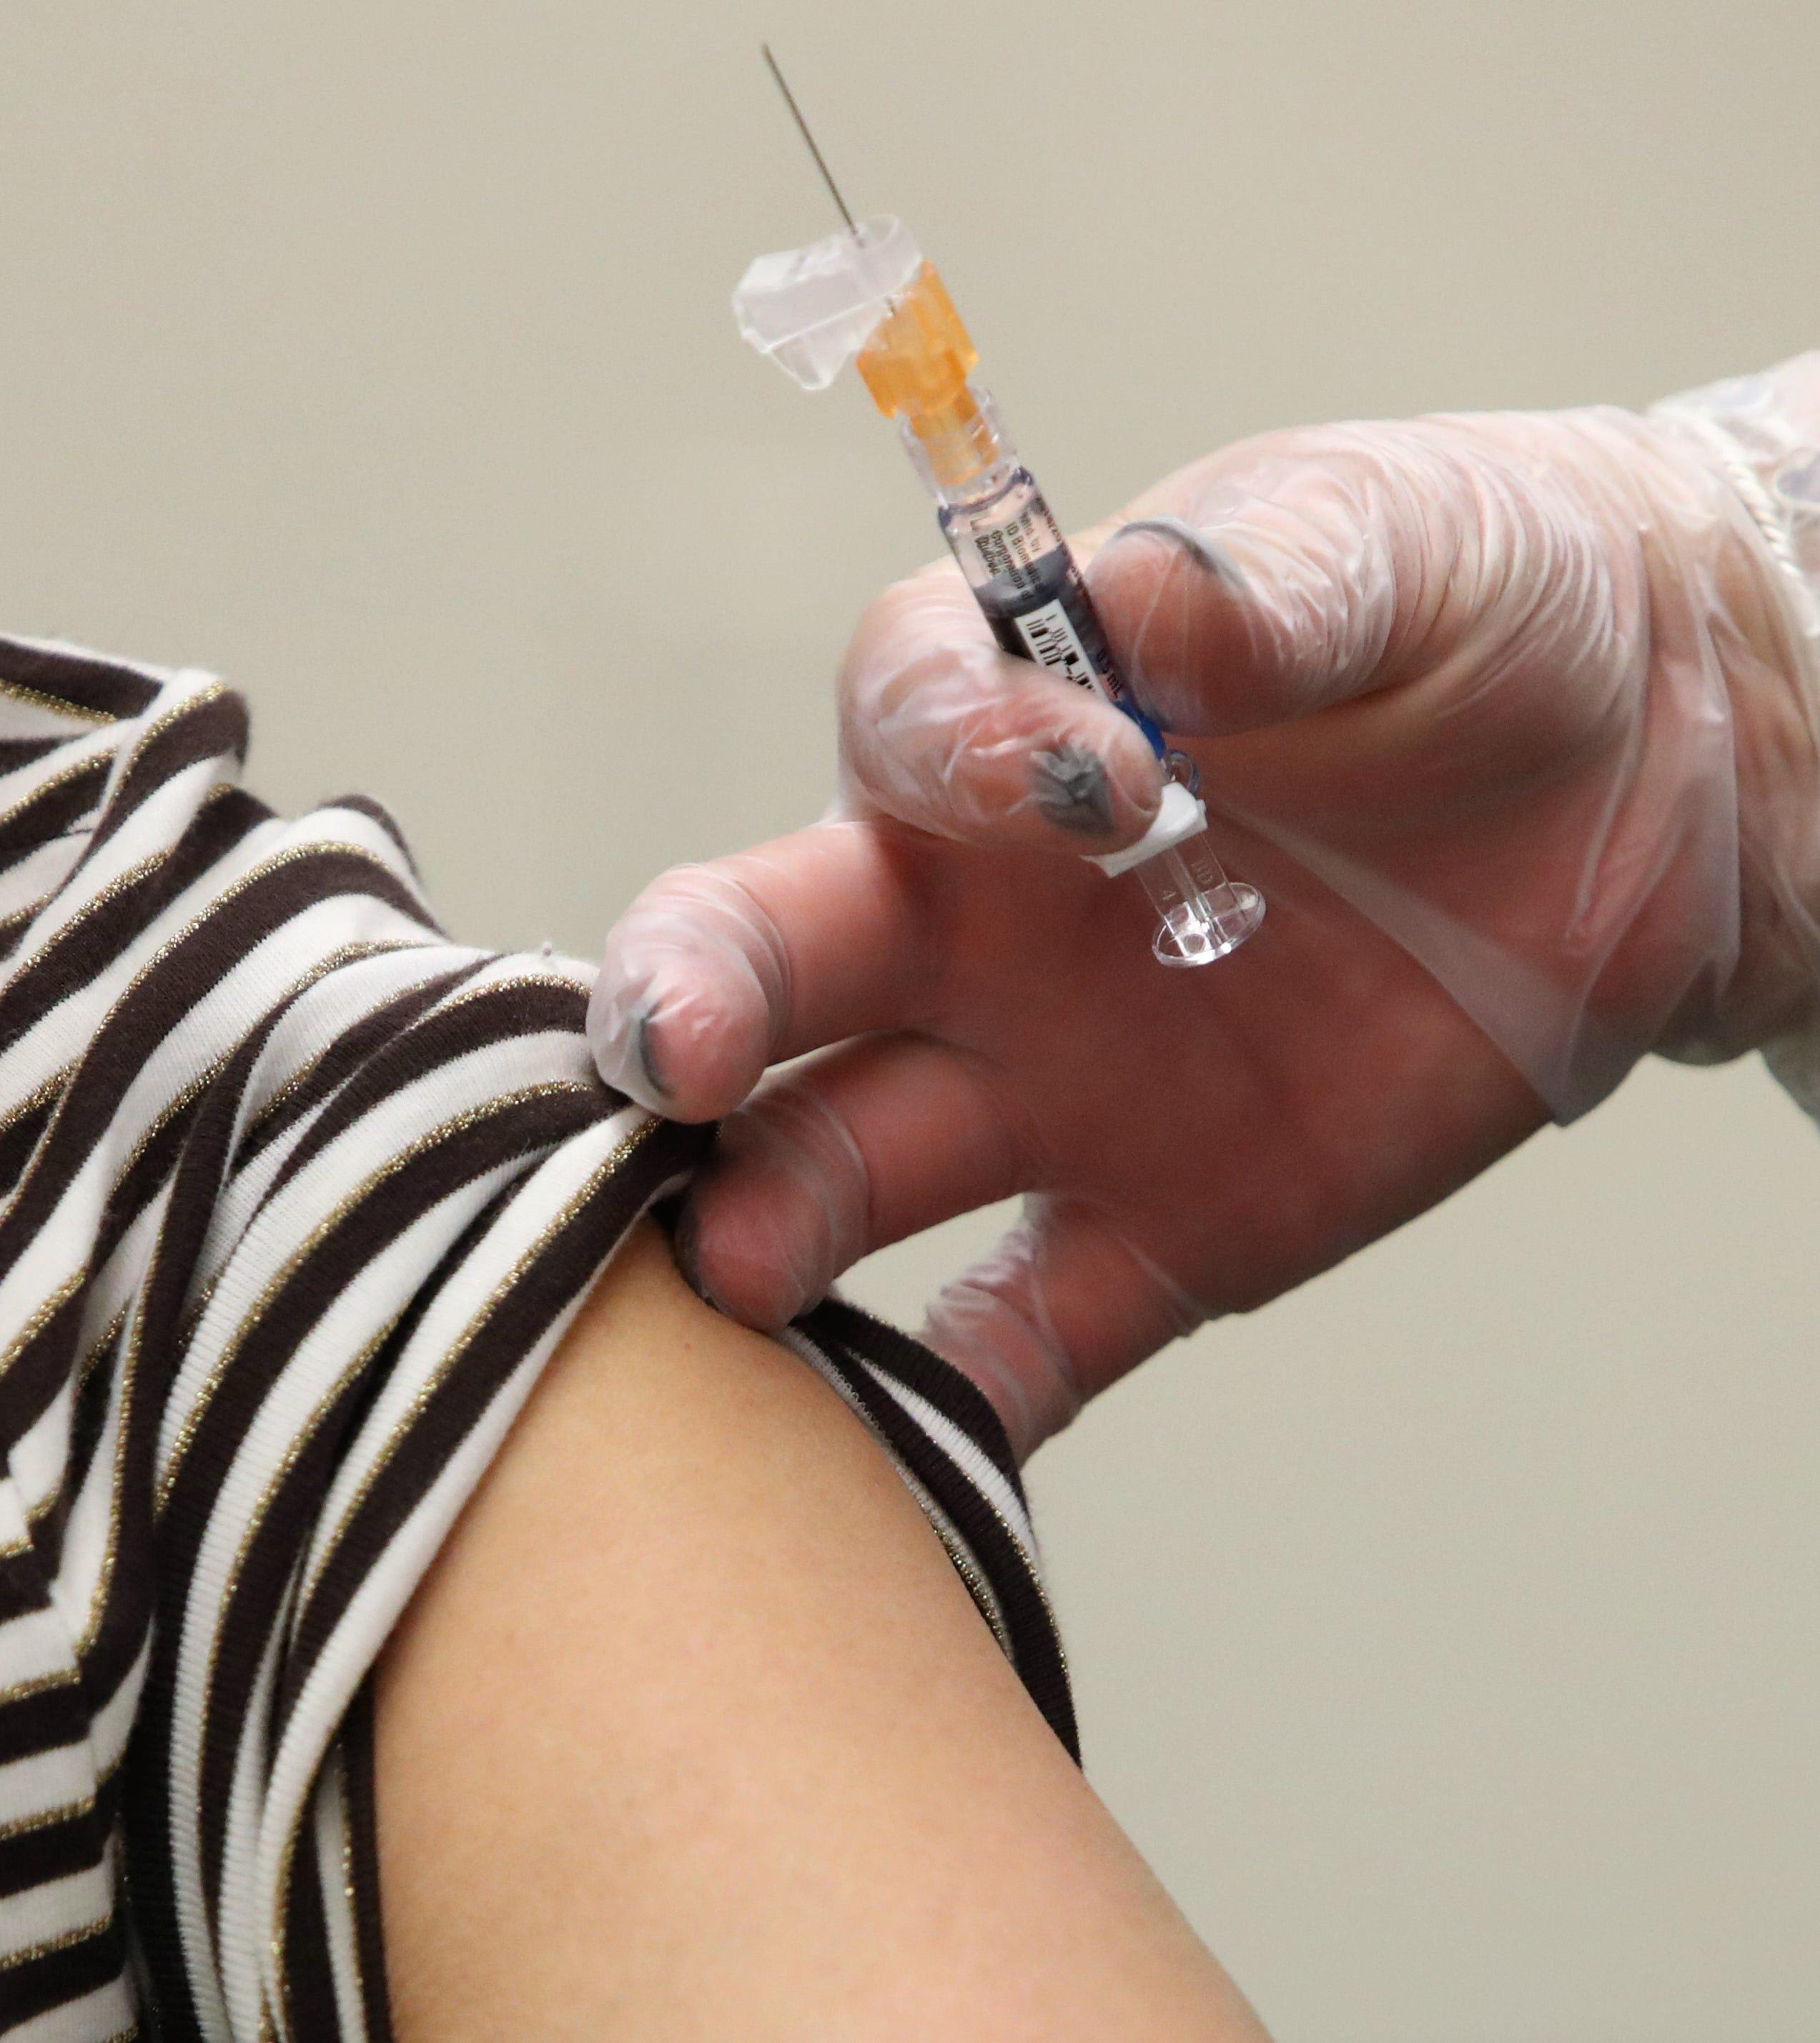 NY trails in adult vaccination rates for tetanus, key diseases. Did pandemic make it worse?